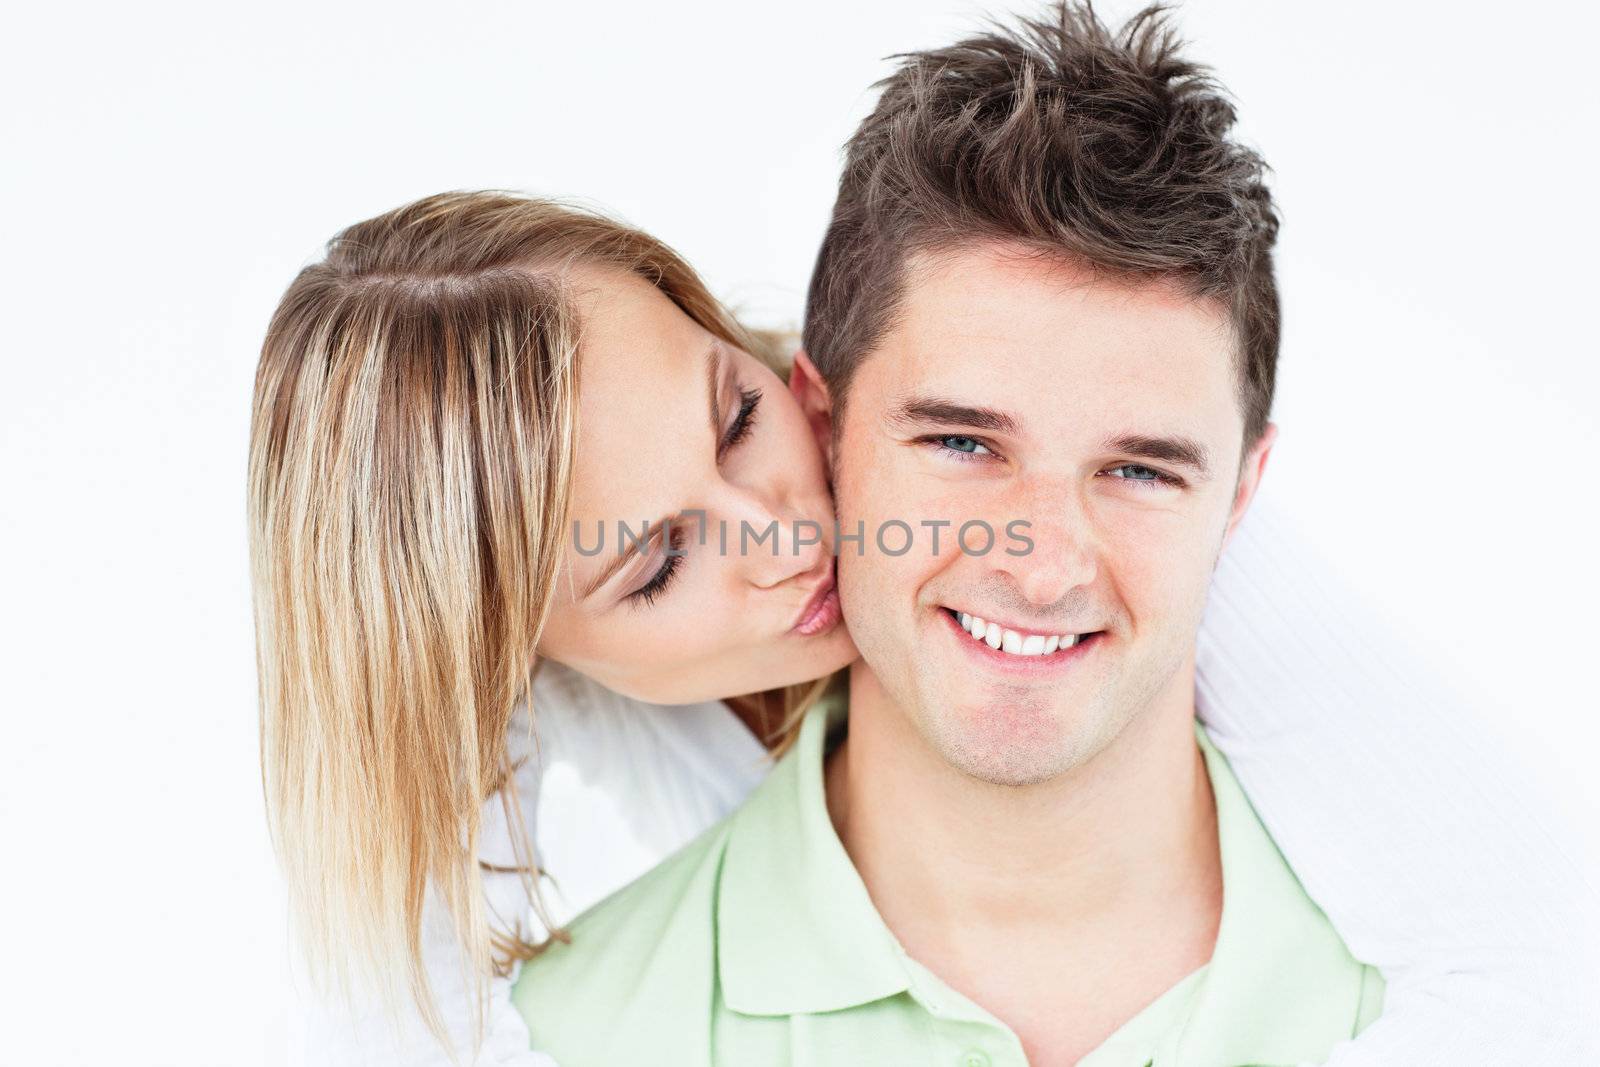 Happy smiling couple in love woman kissing her boyfriend over white background